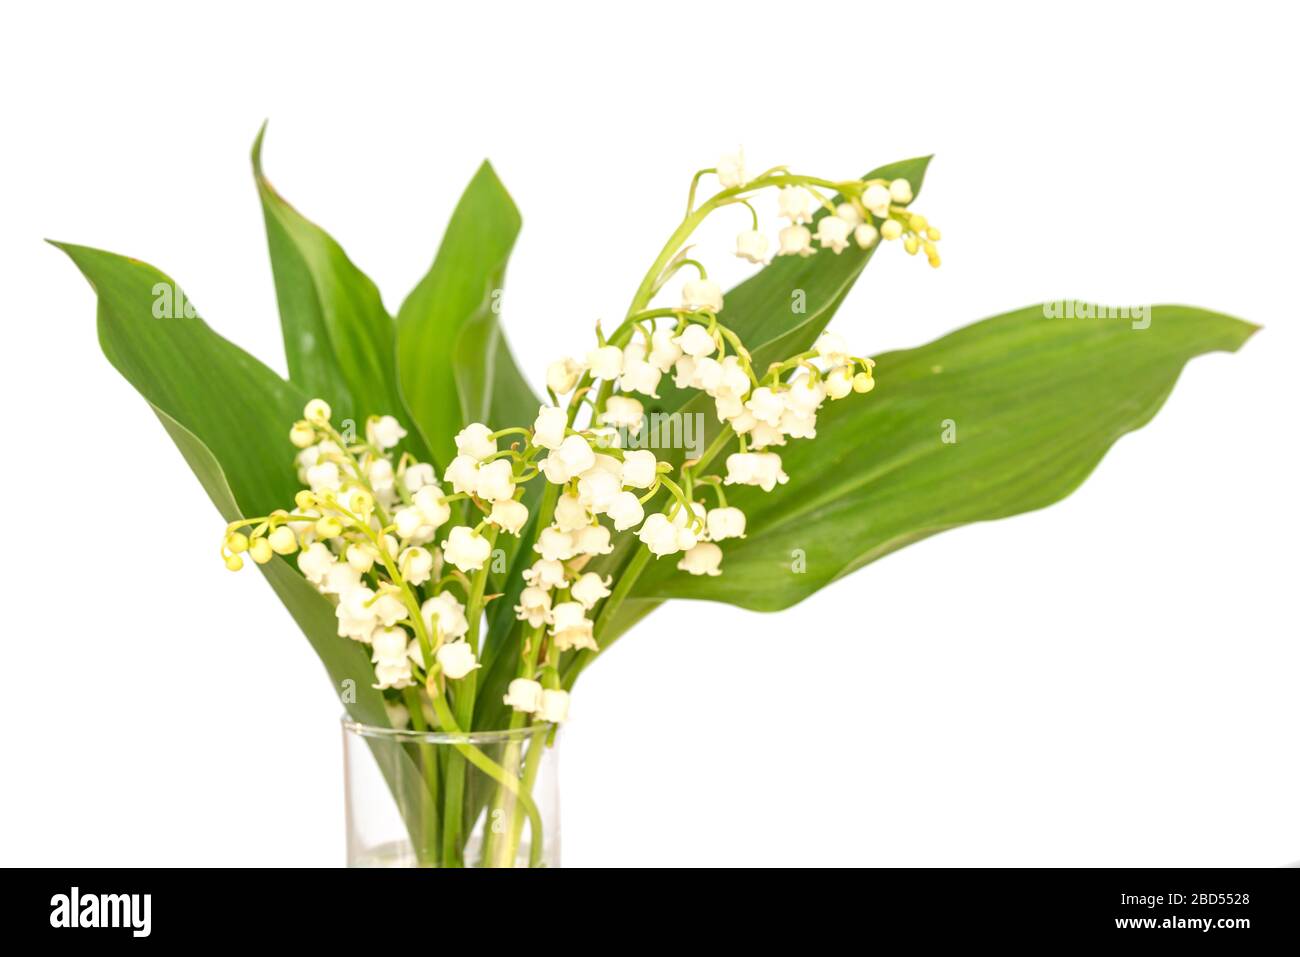 Bouquet of Lily of the valley flower blossoms, isolated on white background. May 1st, Labor Day symbol Stock Photo